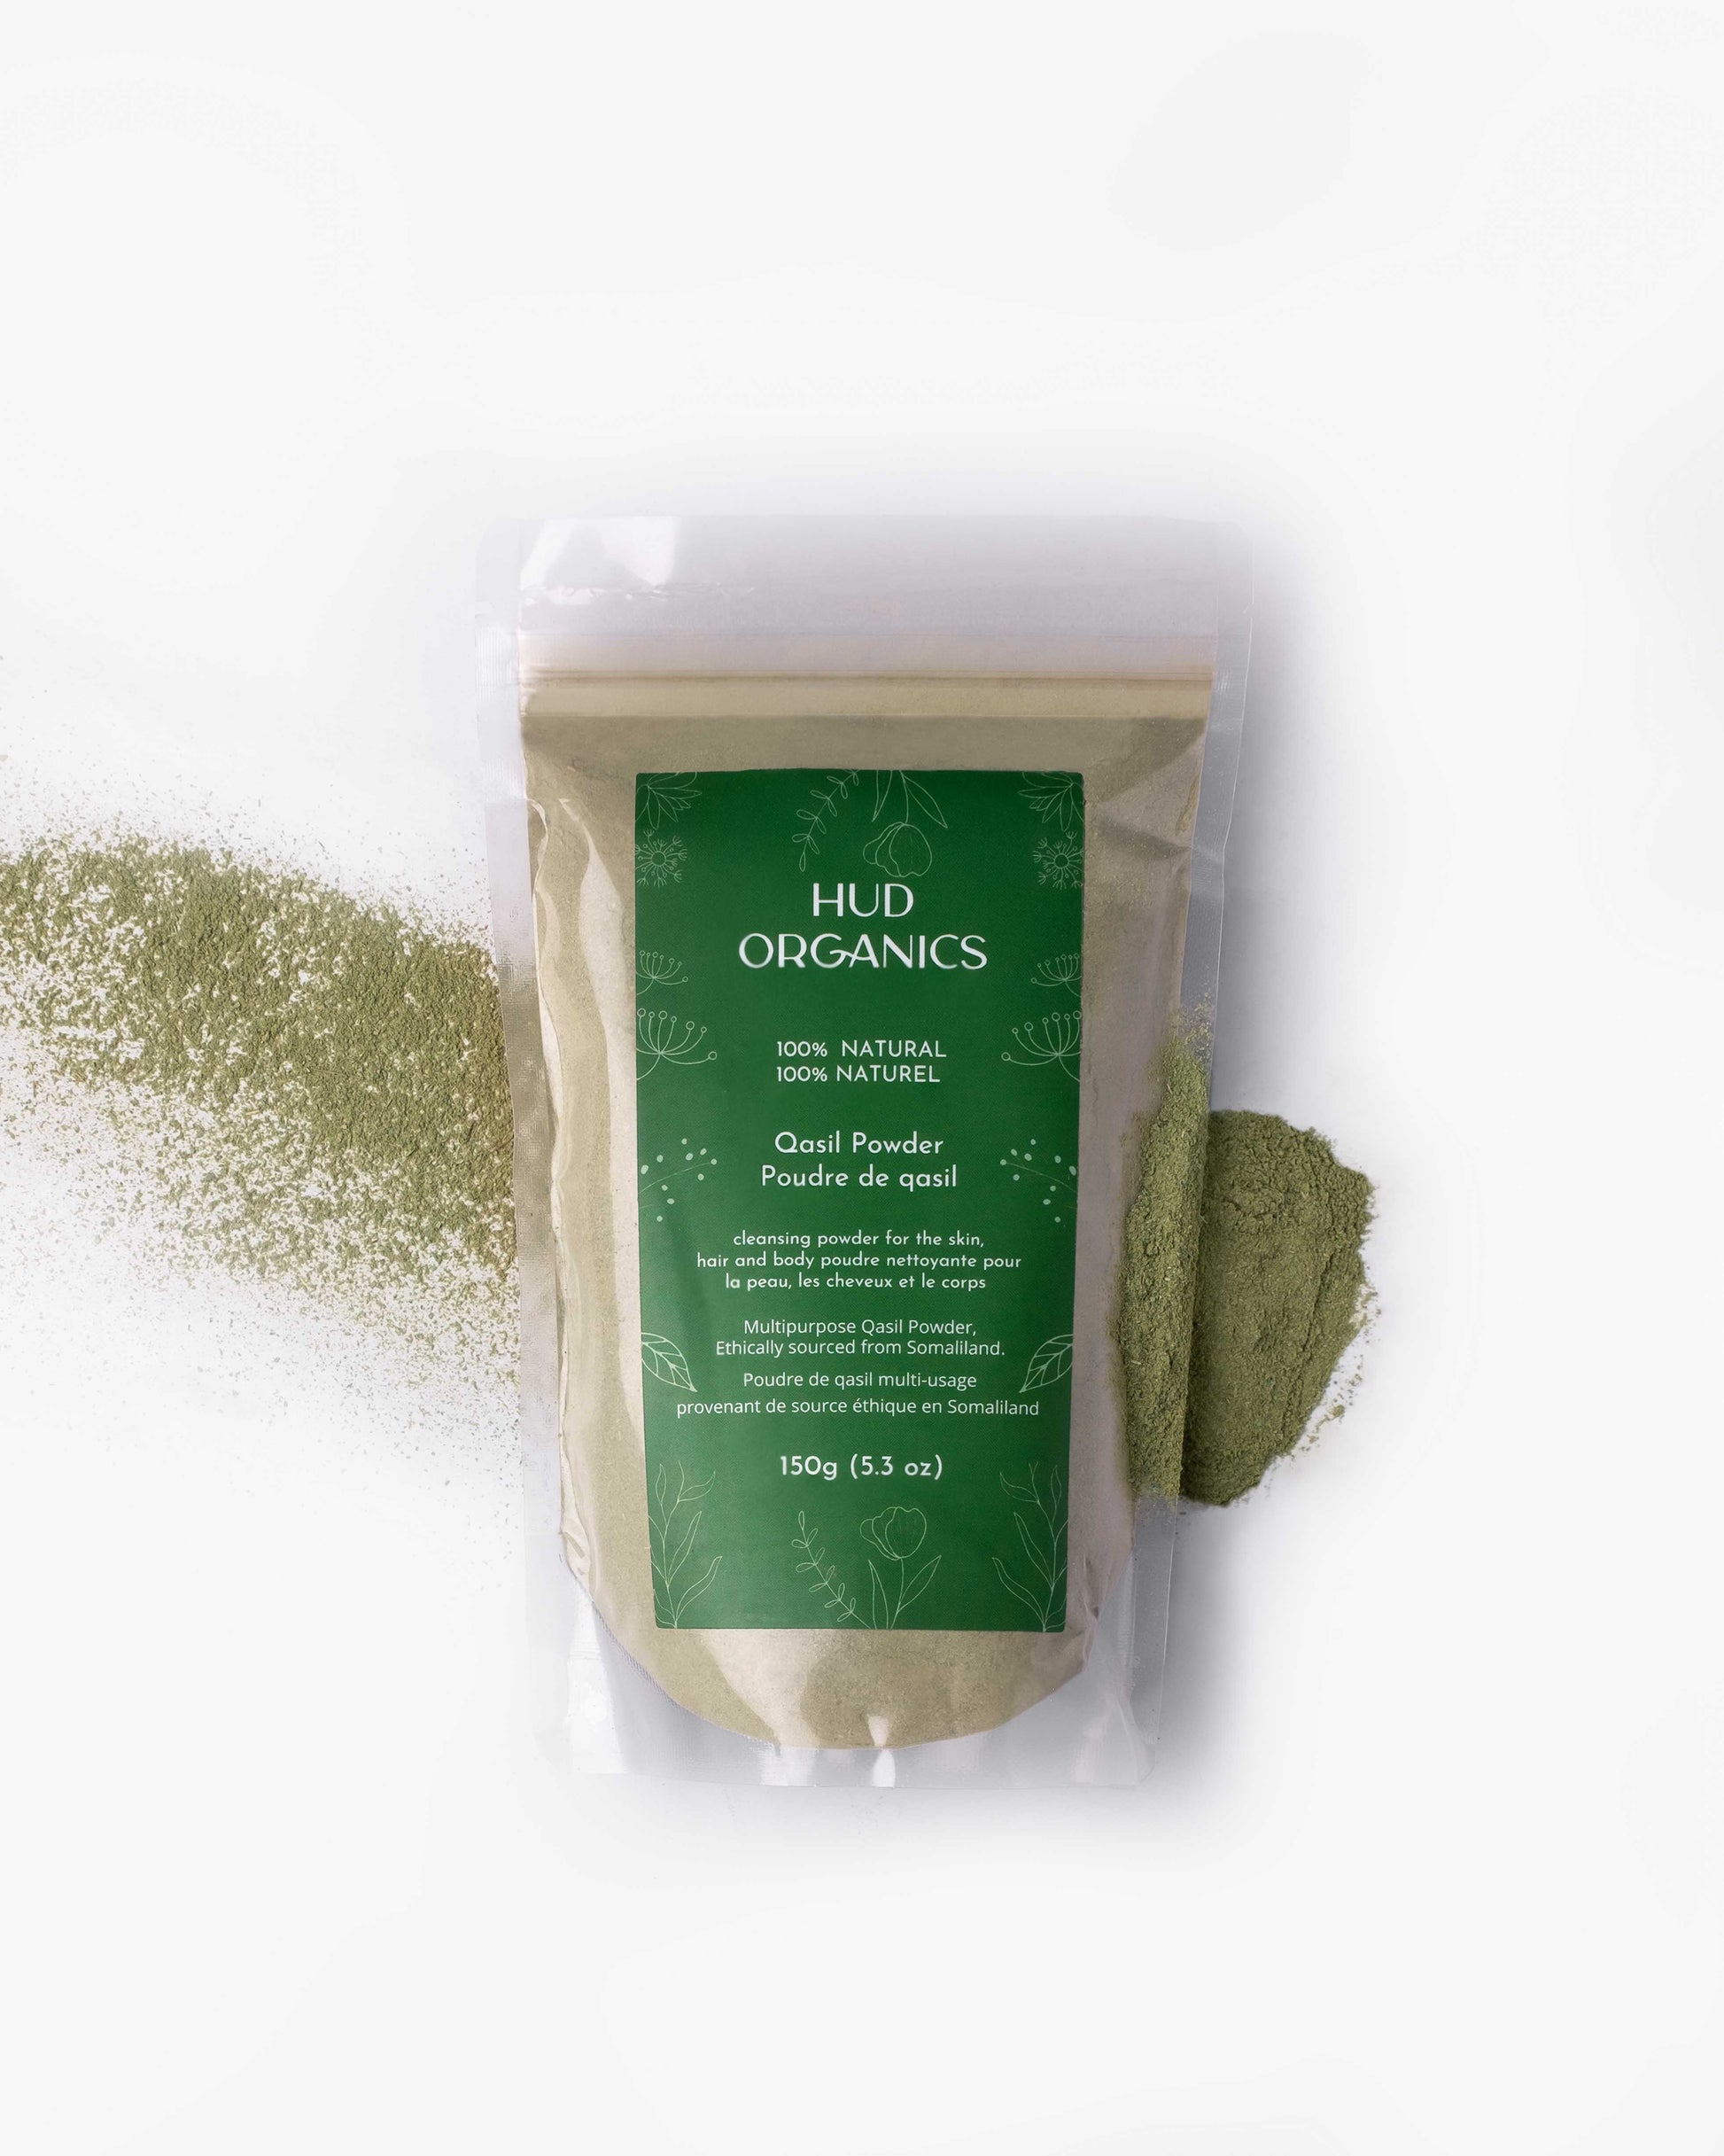 SAAFI AH ORGANICS Qasil Powder Natural Leaf Powder, exfoliates, detoxifies,  Helps with clogged pores and Blemishes. soap,Used as a Shampoo. (Large 5